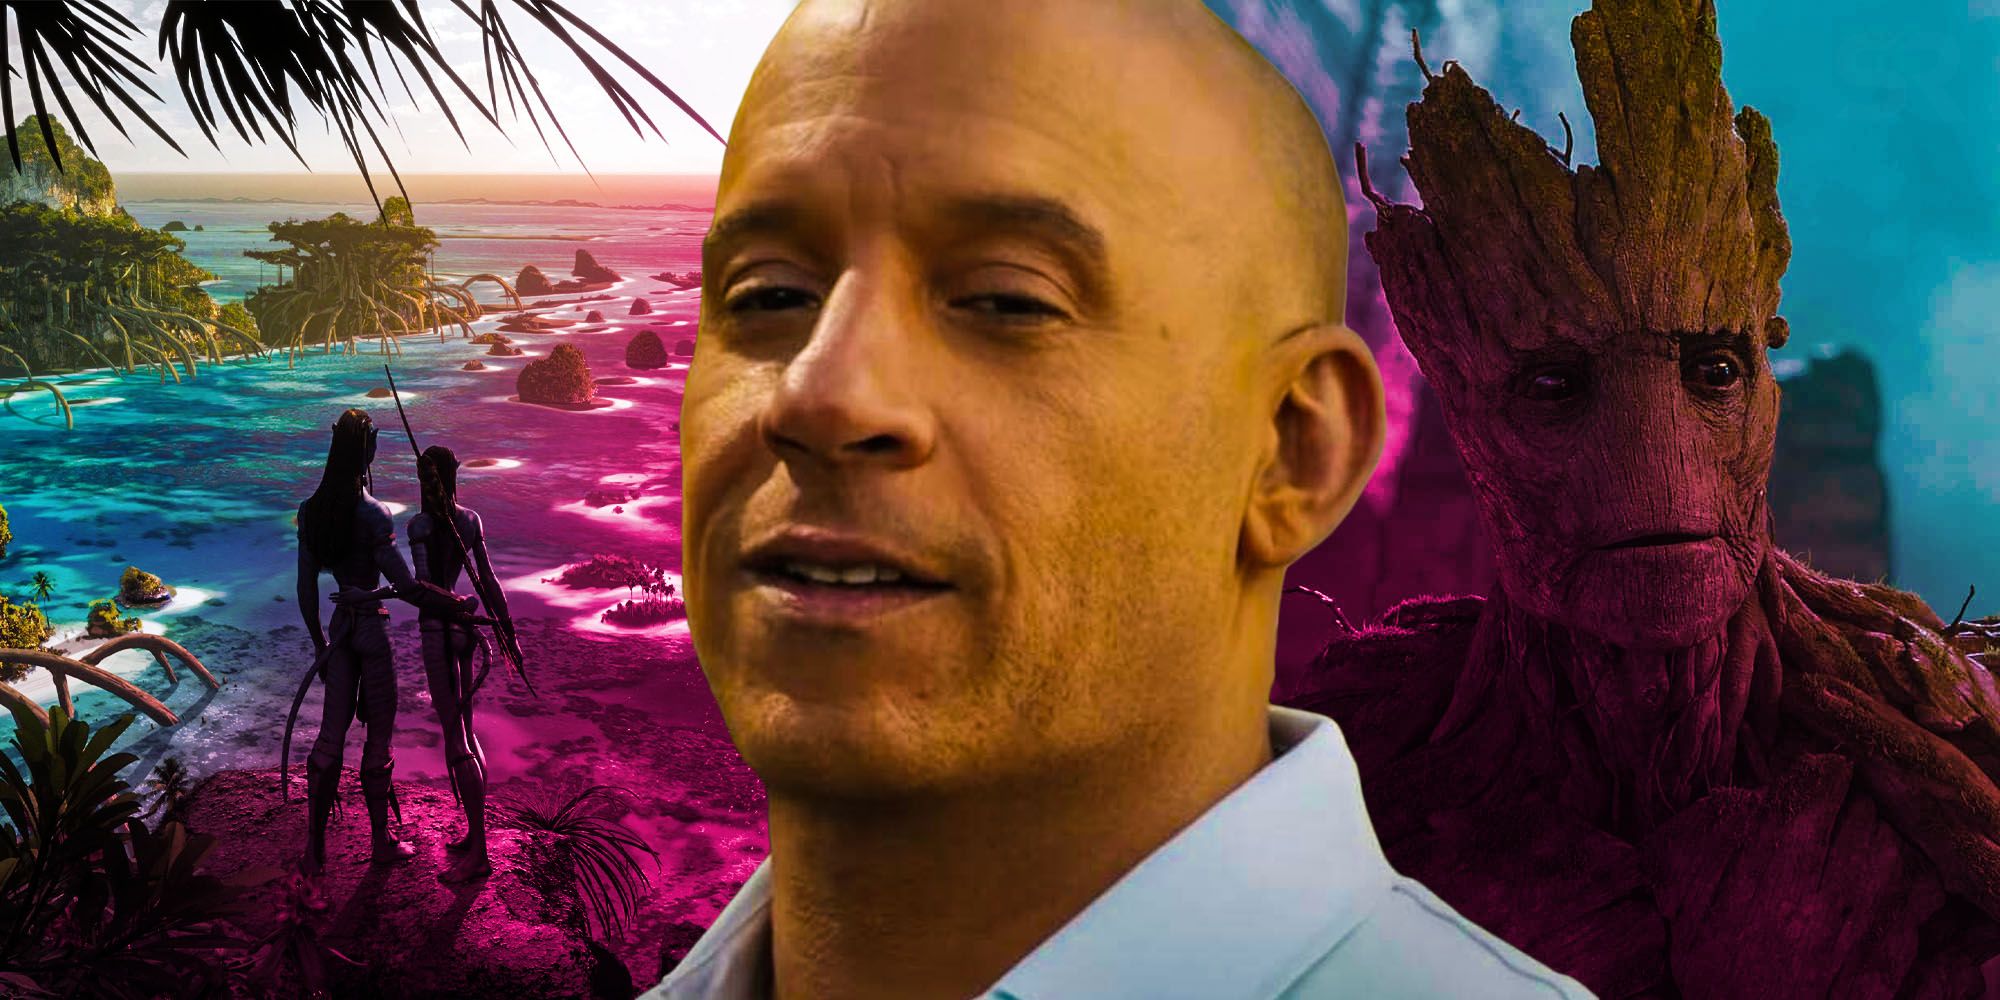 Vin diesel upcoming movies Fast 9 Avatar 2 and 3 Groot Thor love and thunder